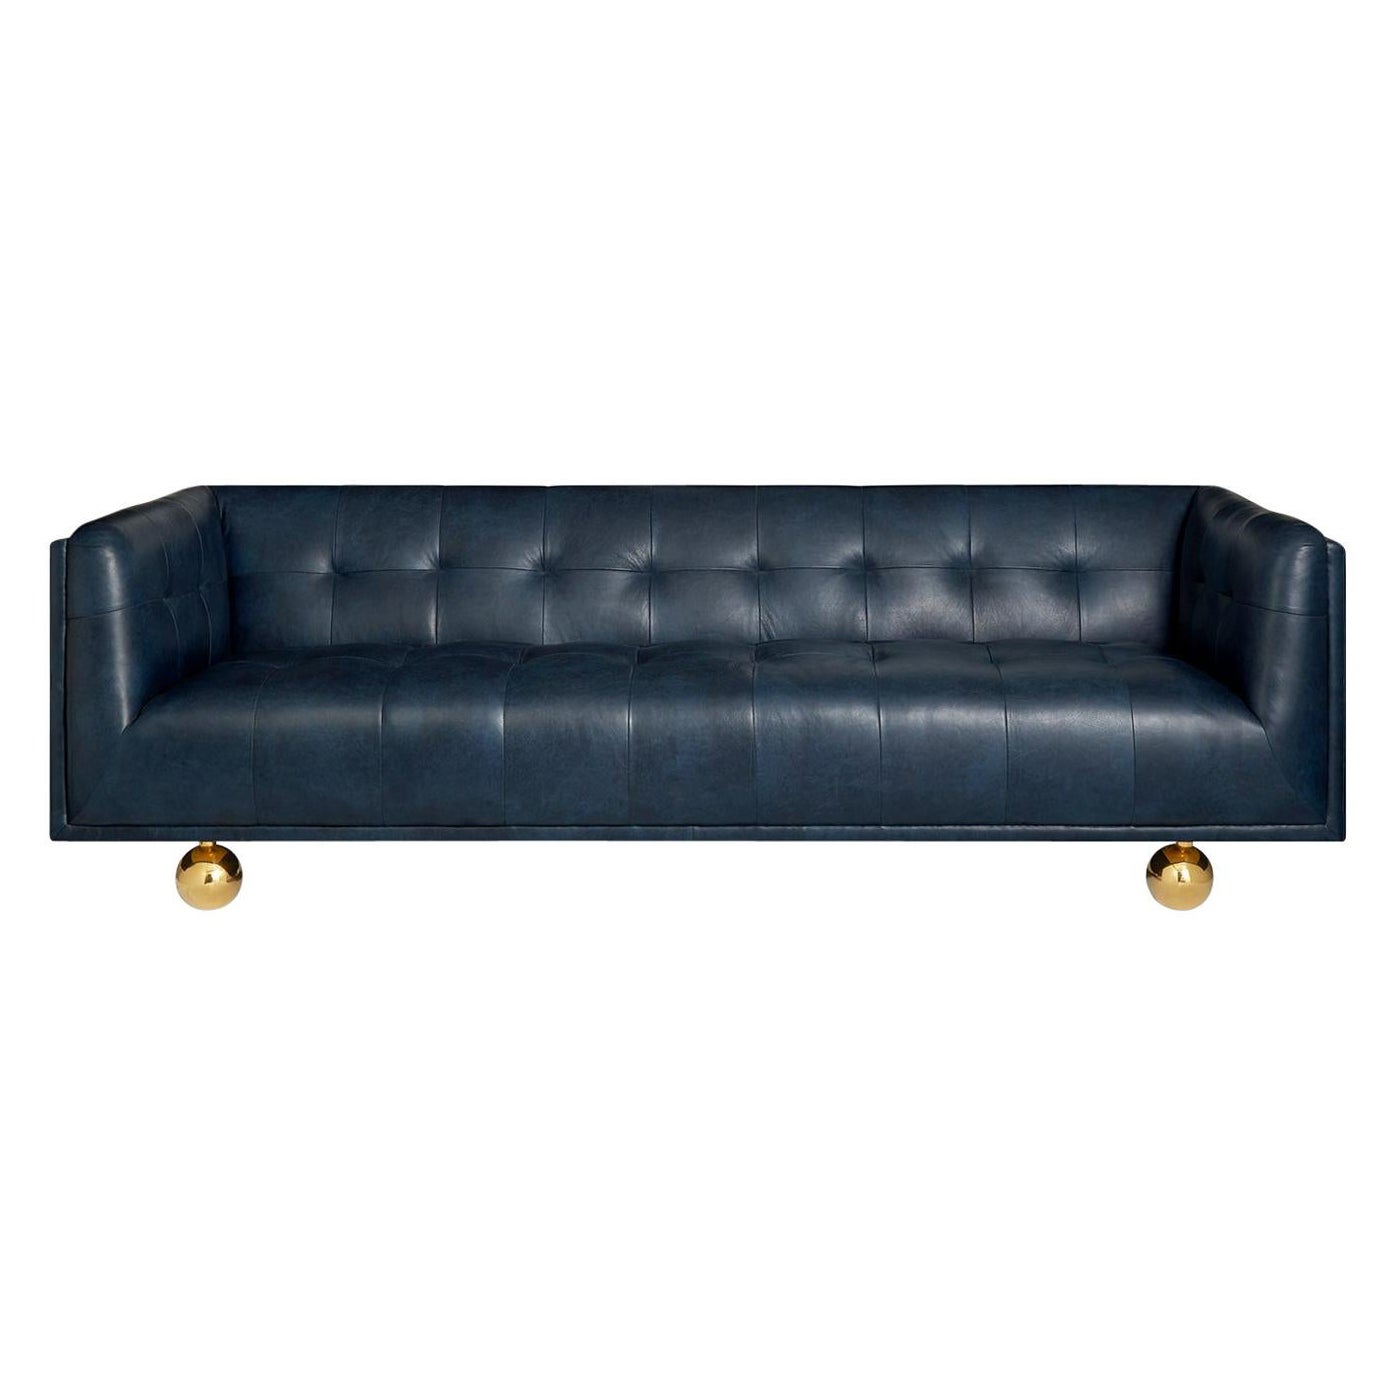 Claridge Modern Chesterfield Sofa in Navy Leather For Sale